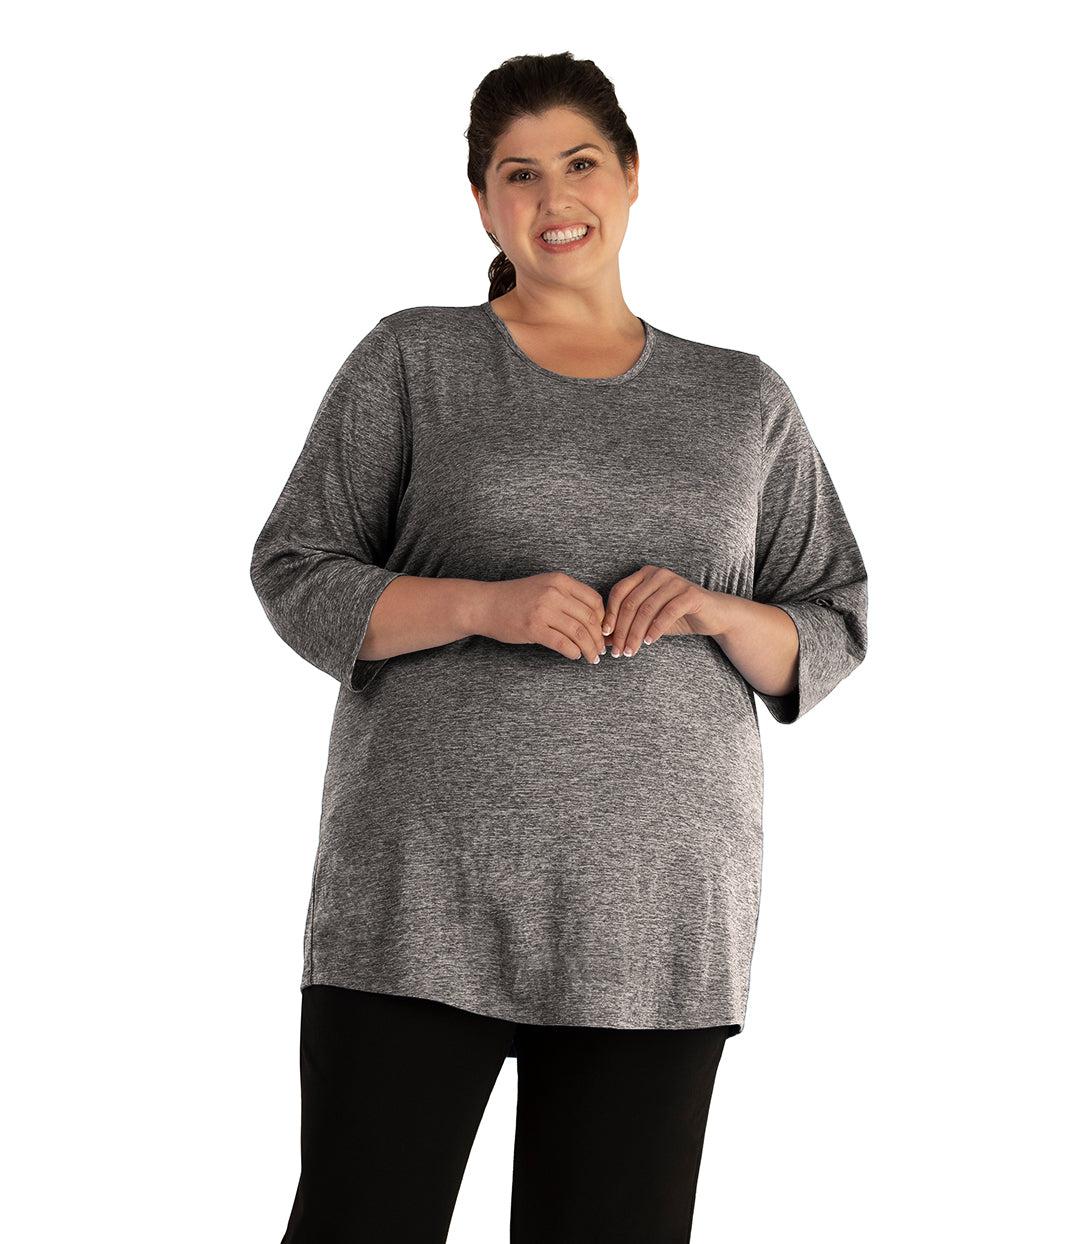 Plus size woman, facing front, wearing JunoActive plus size QuikLite Scoop Neck ¾ Sleeve Top in the color Heather Charcoal. She is wearing JunoActive Plus Size Leggings in the color Black.